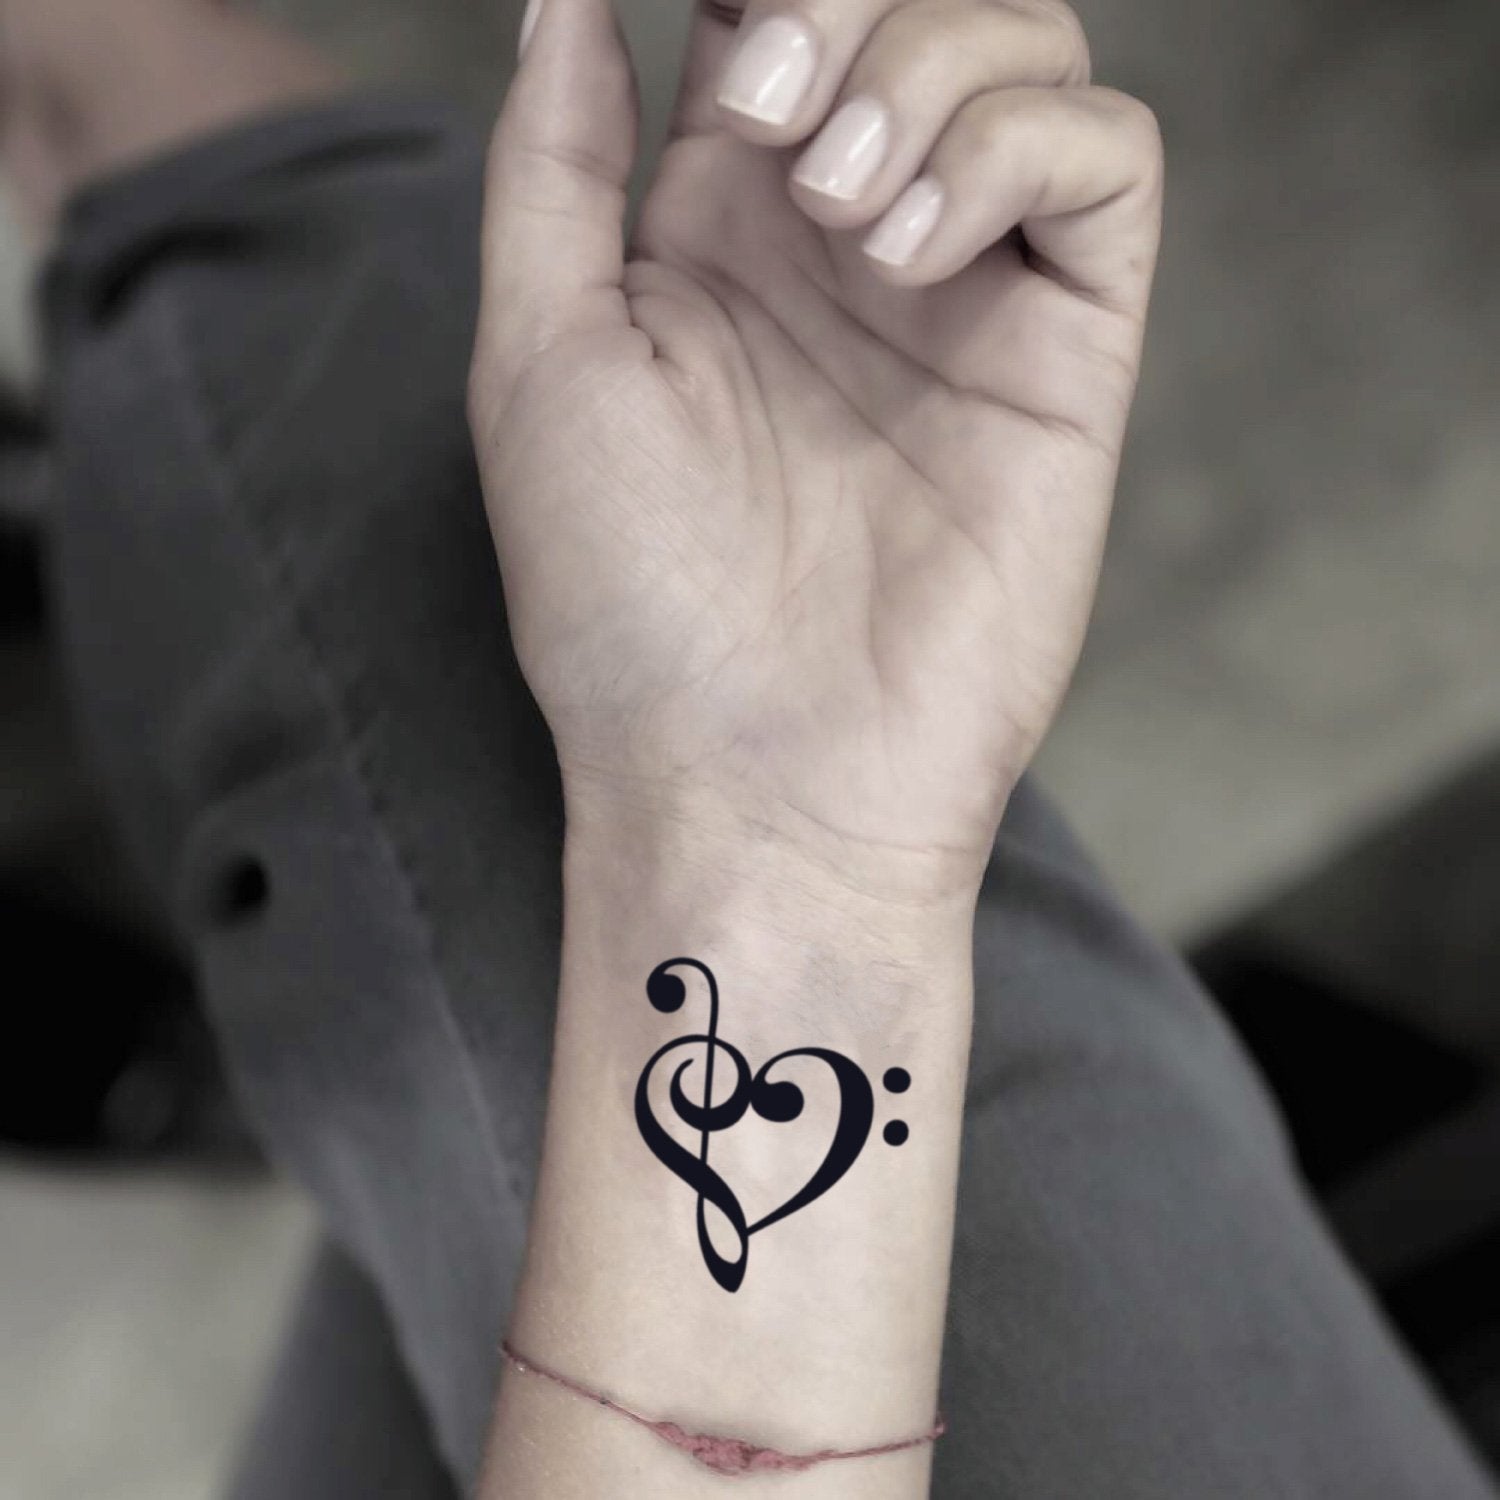 89+ Creative Music Tattoos That Are Sure to Blow Your Mind | WarmArt Tattoo  And Body Piercing